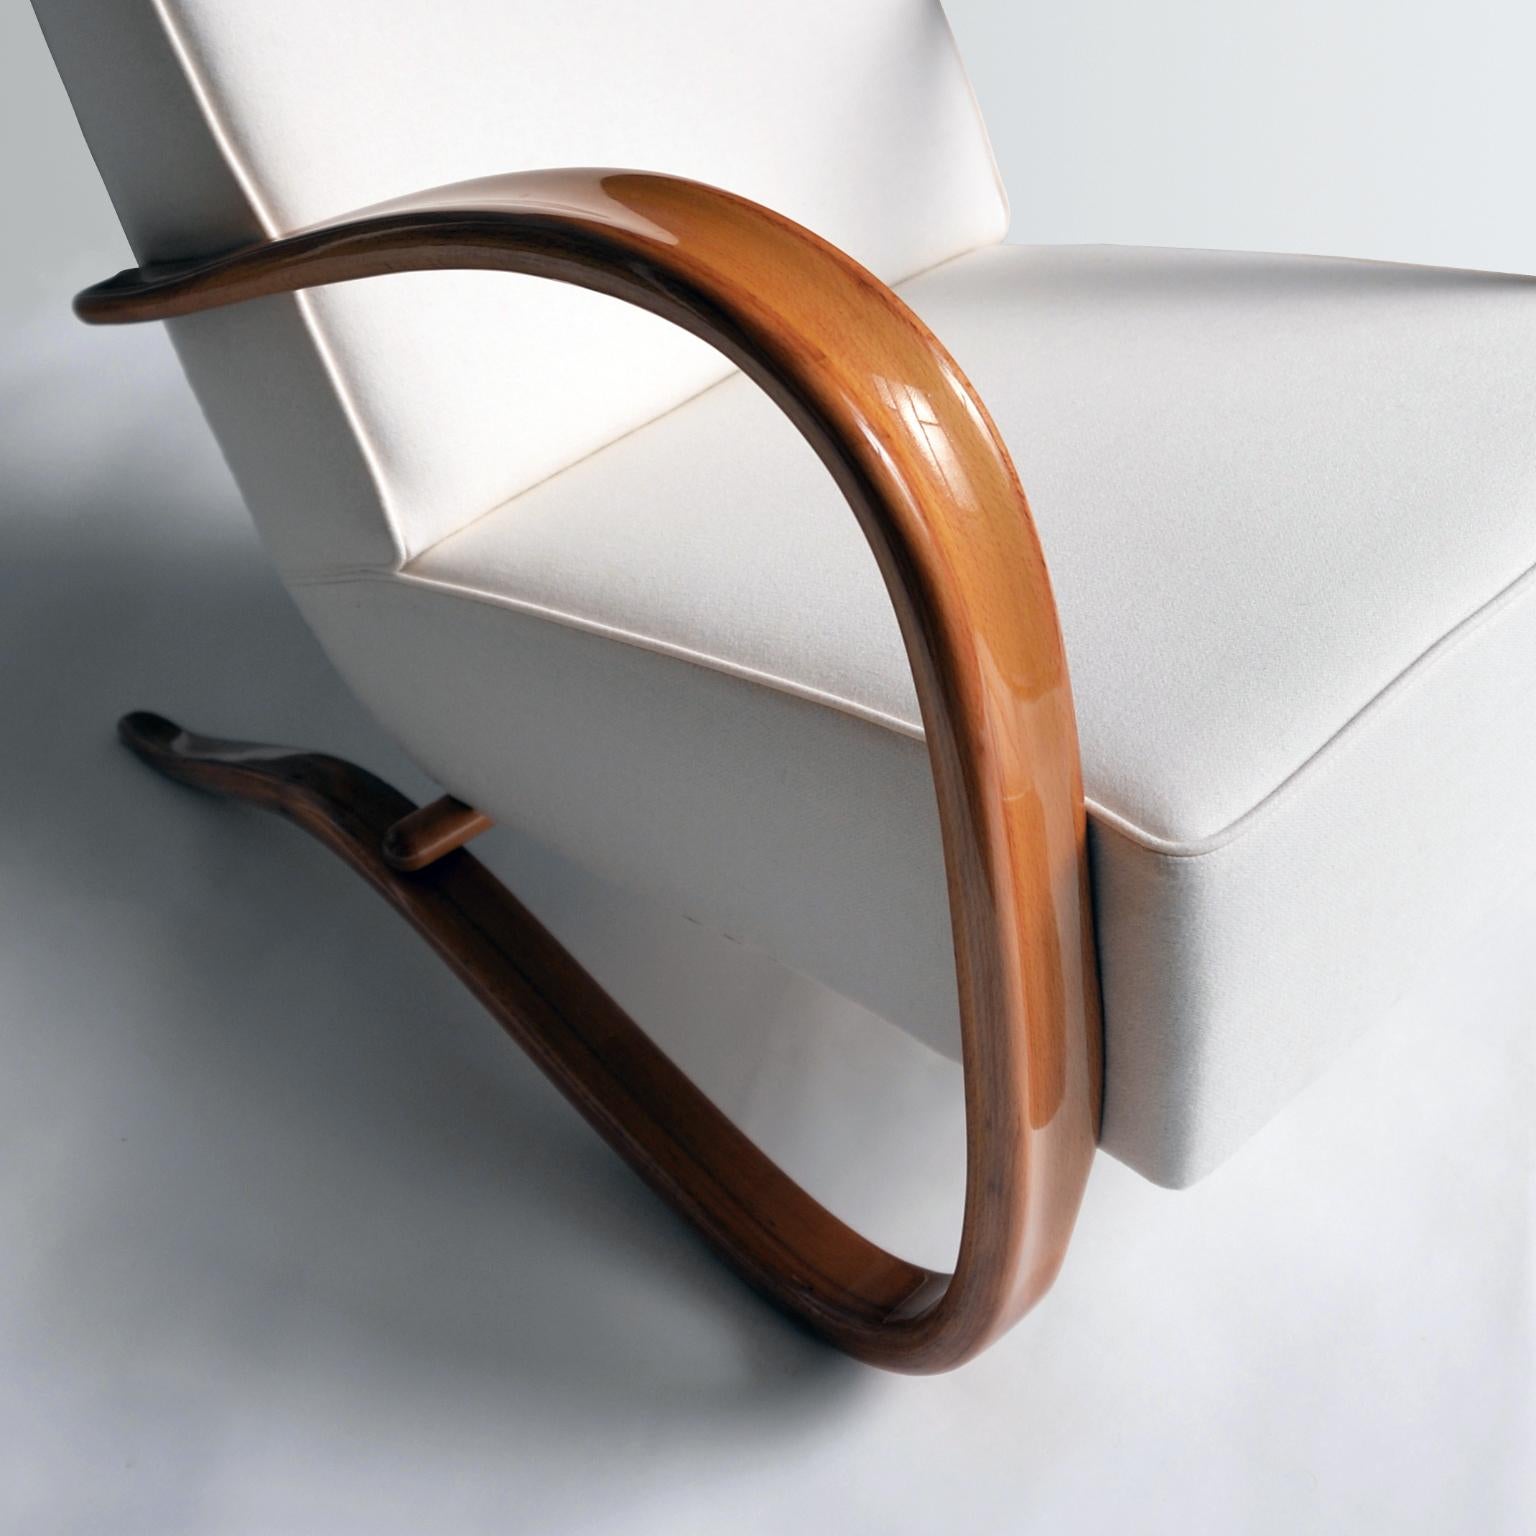 Glazed Customized H269 Armchair by Jindrich Halabala, Glossy Lacquer, Fabric Upholstery For Sale